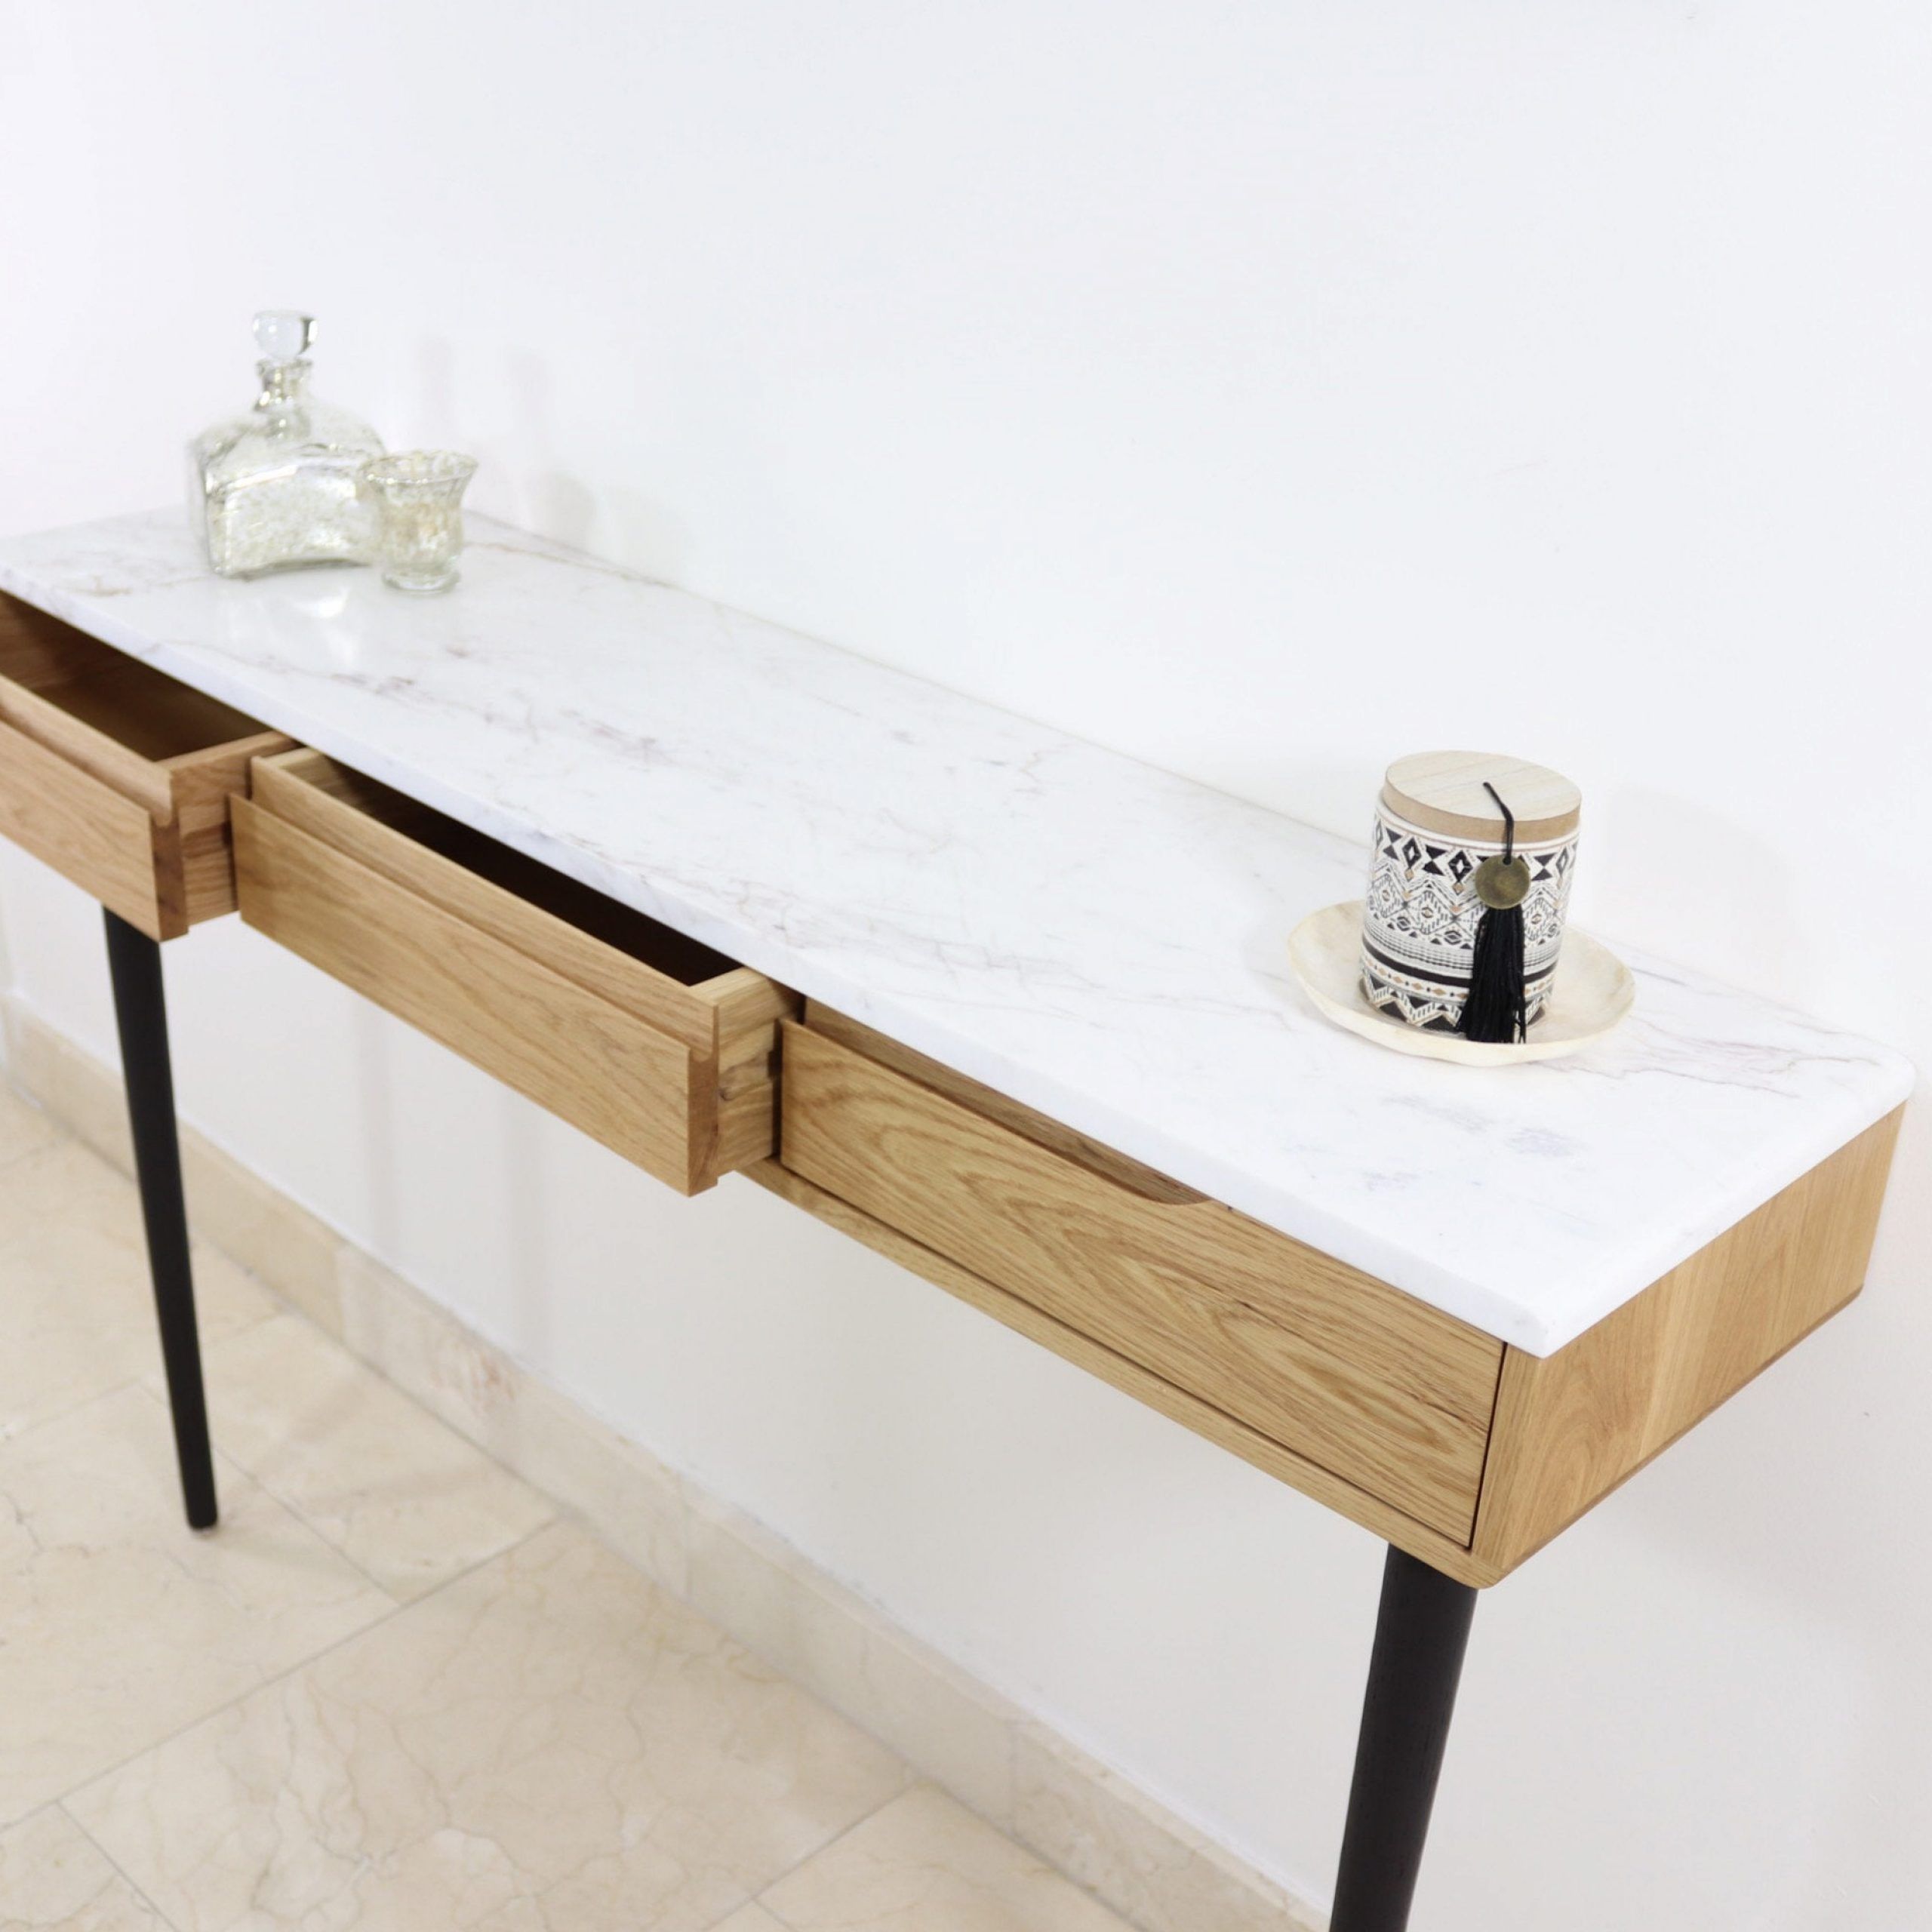 Console Table With Drawers In Solid American Oak With Top In Wood Or Regarding Honey Oak And Marble Console Tables (View 3 of 20)